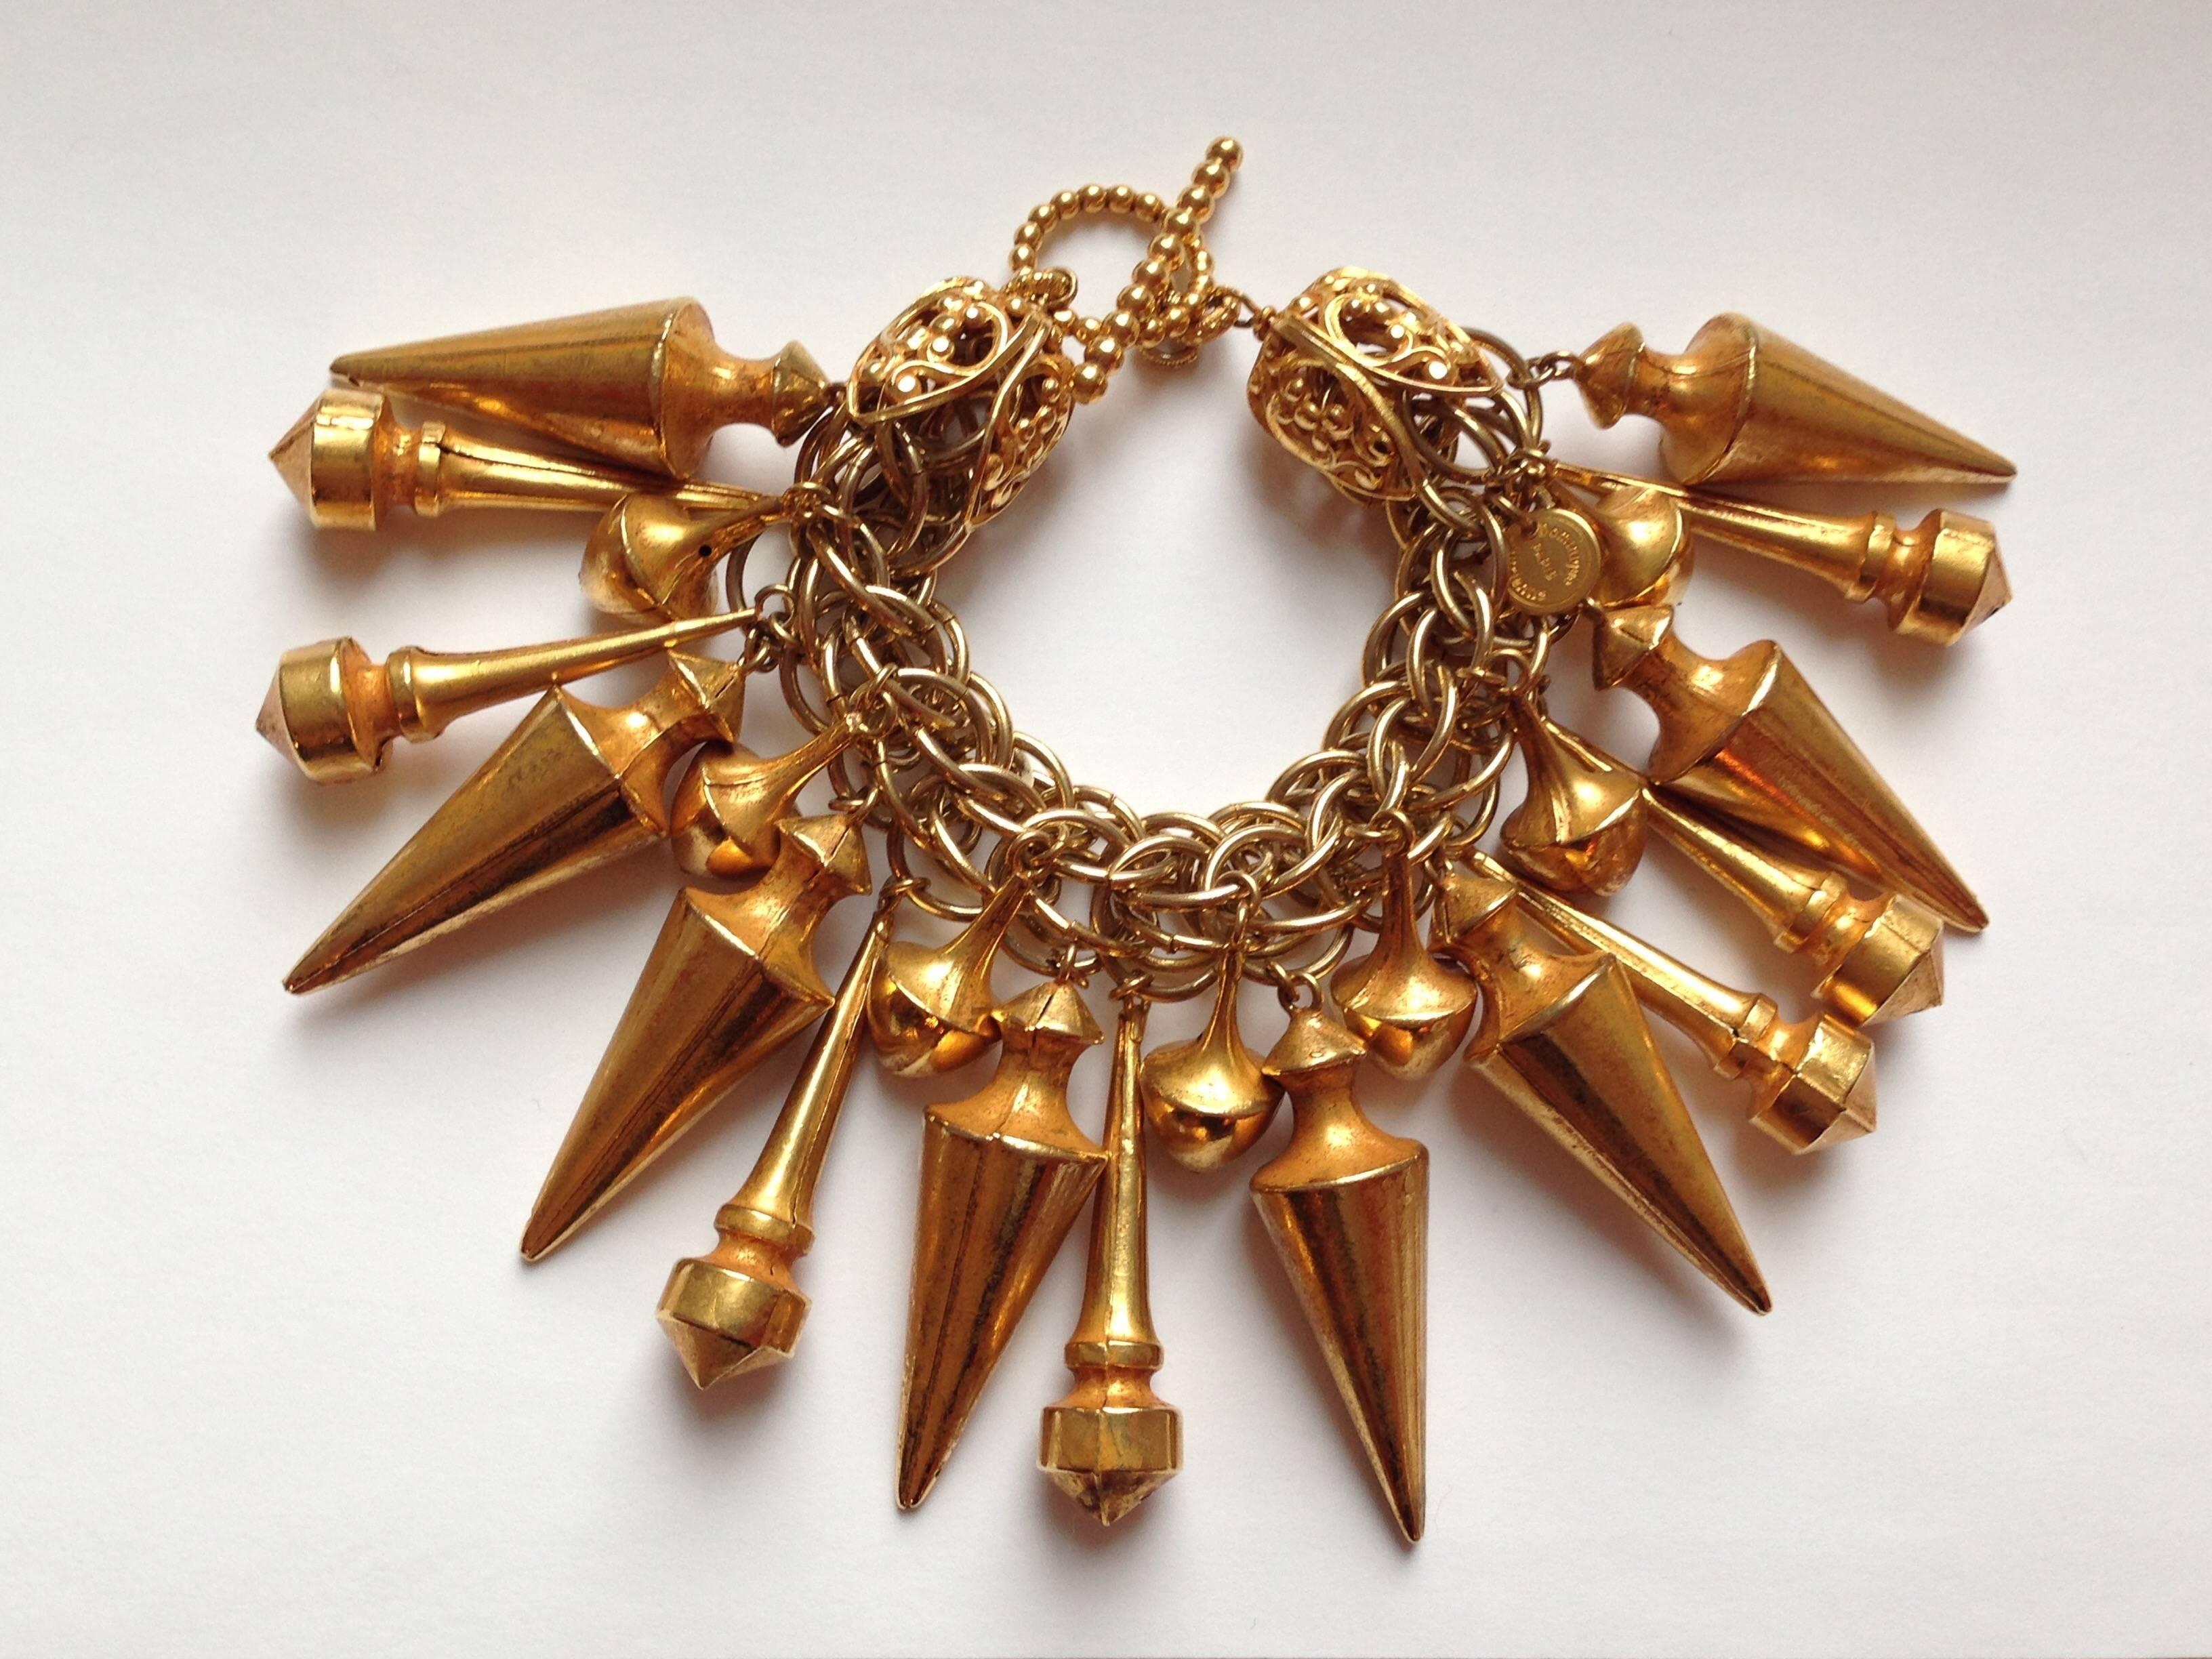 This is a large statement making 1980s goldtone Dominique Aurientis bracelet with hanging charms. The chain is 7 1/2